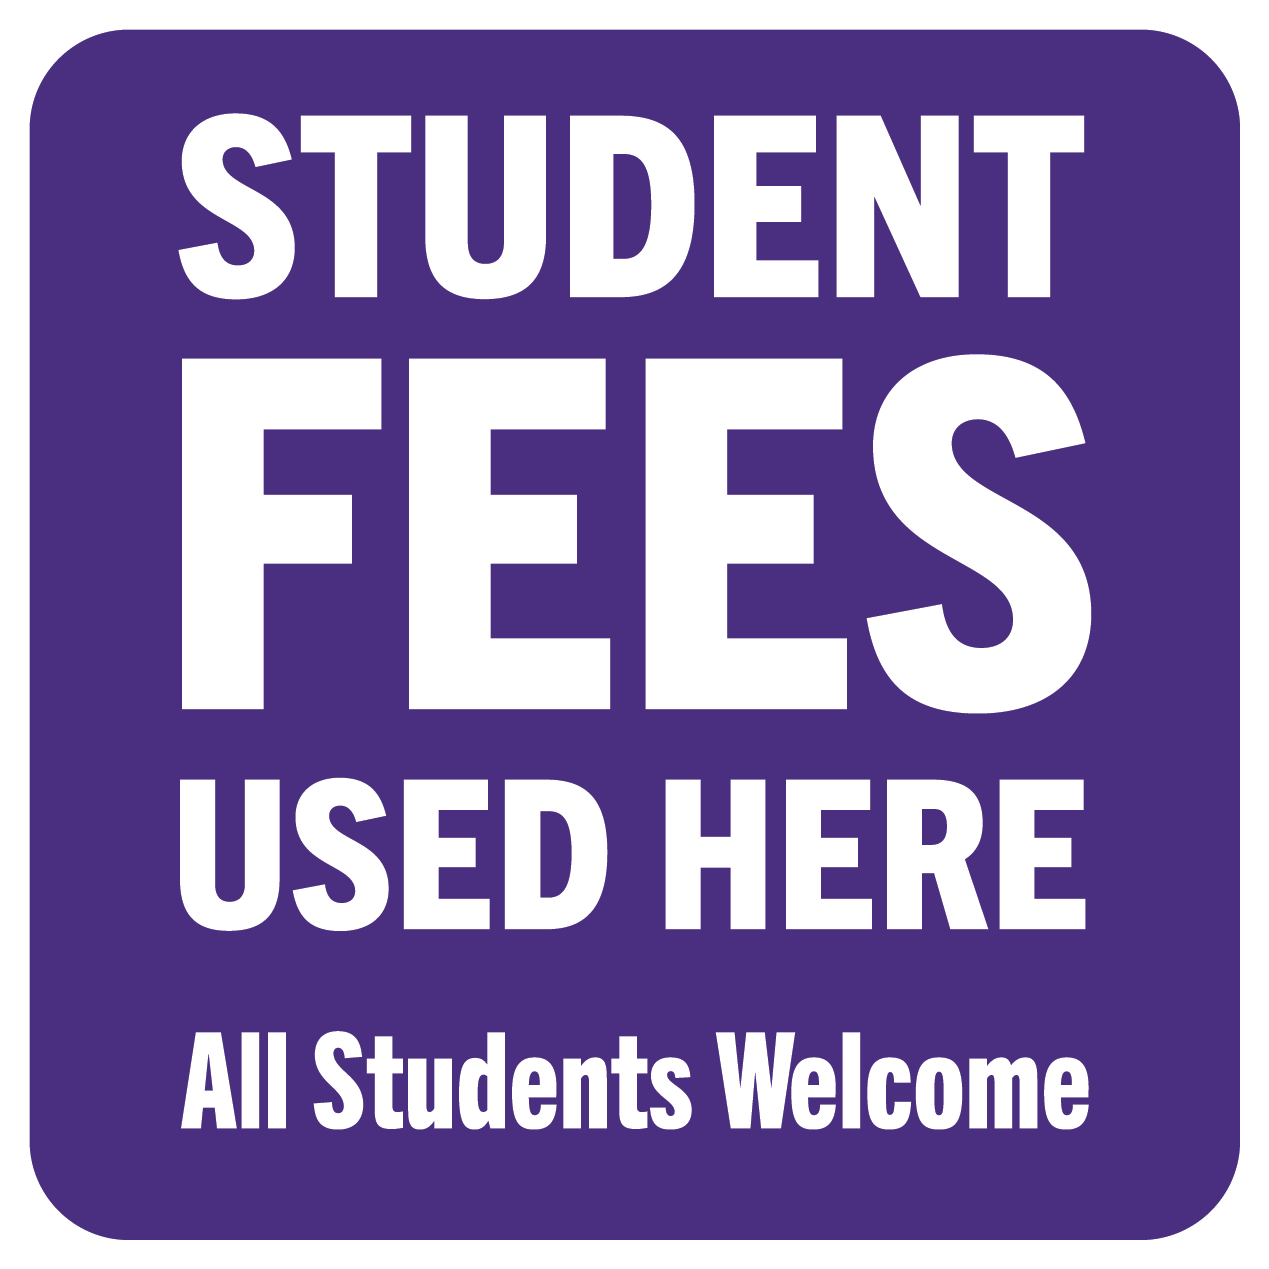 Student Fees Used Here